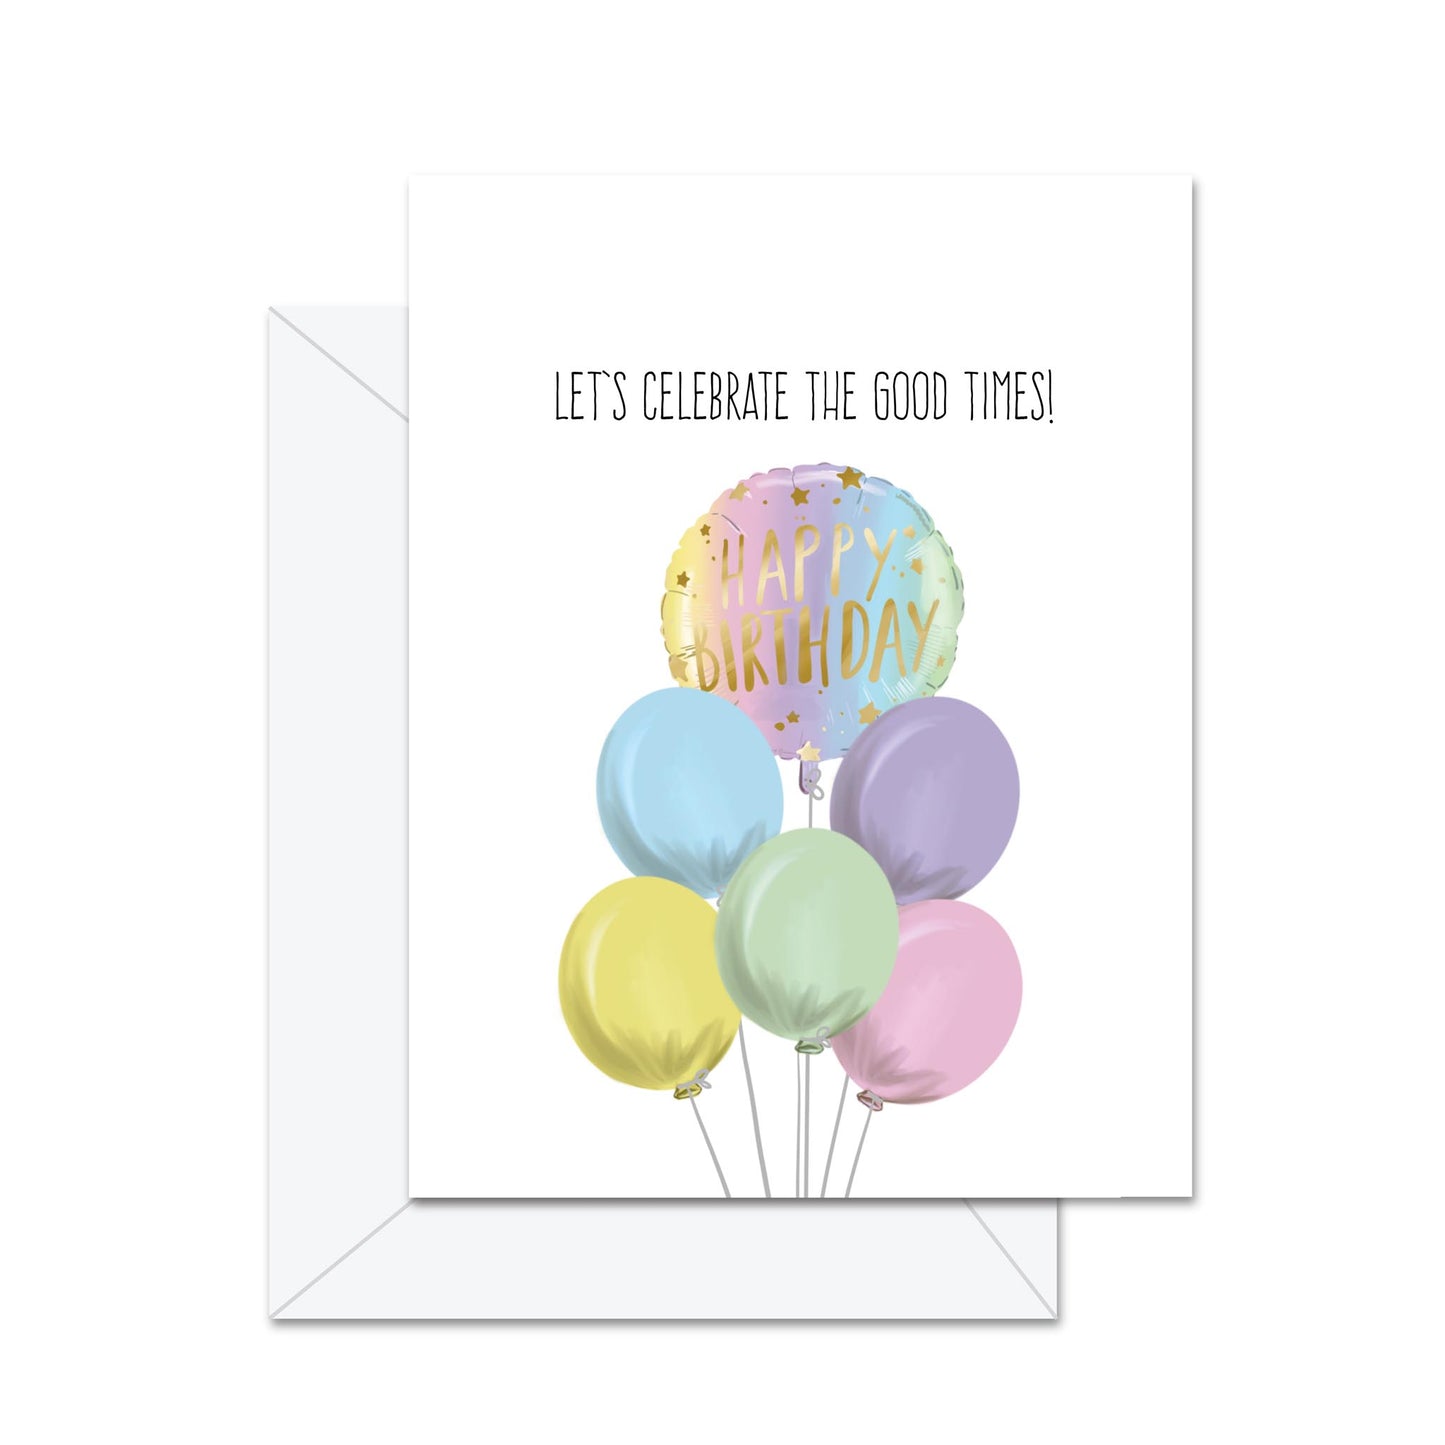 Let's Celebrate The Good Times! - Greeting Card